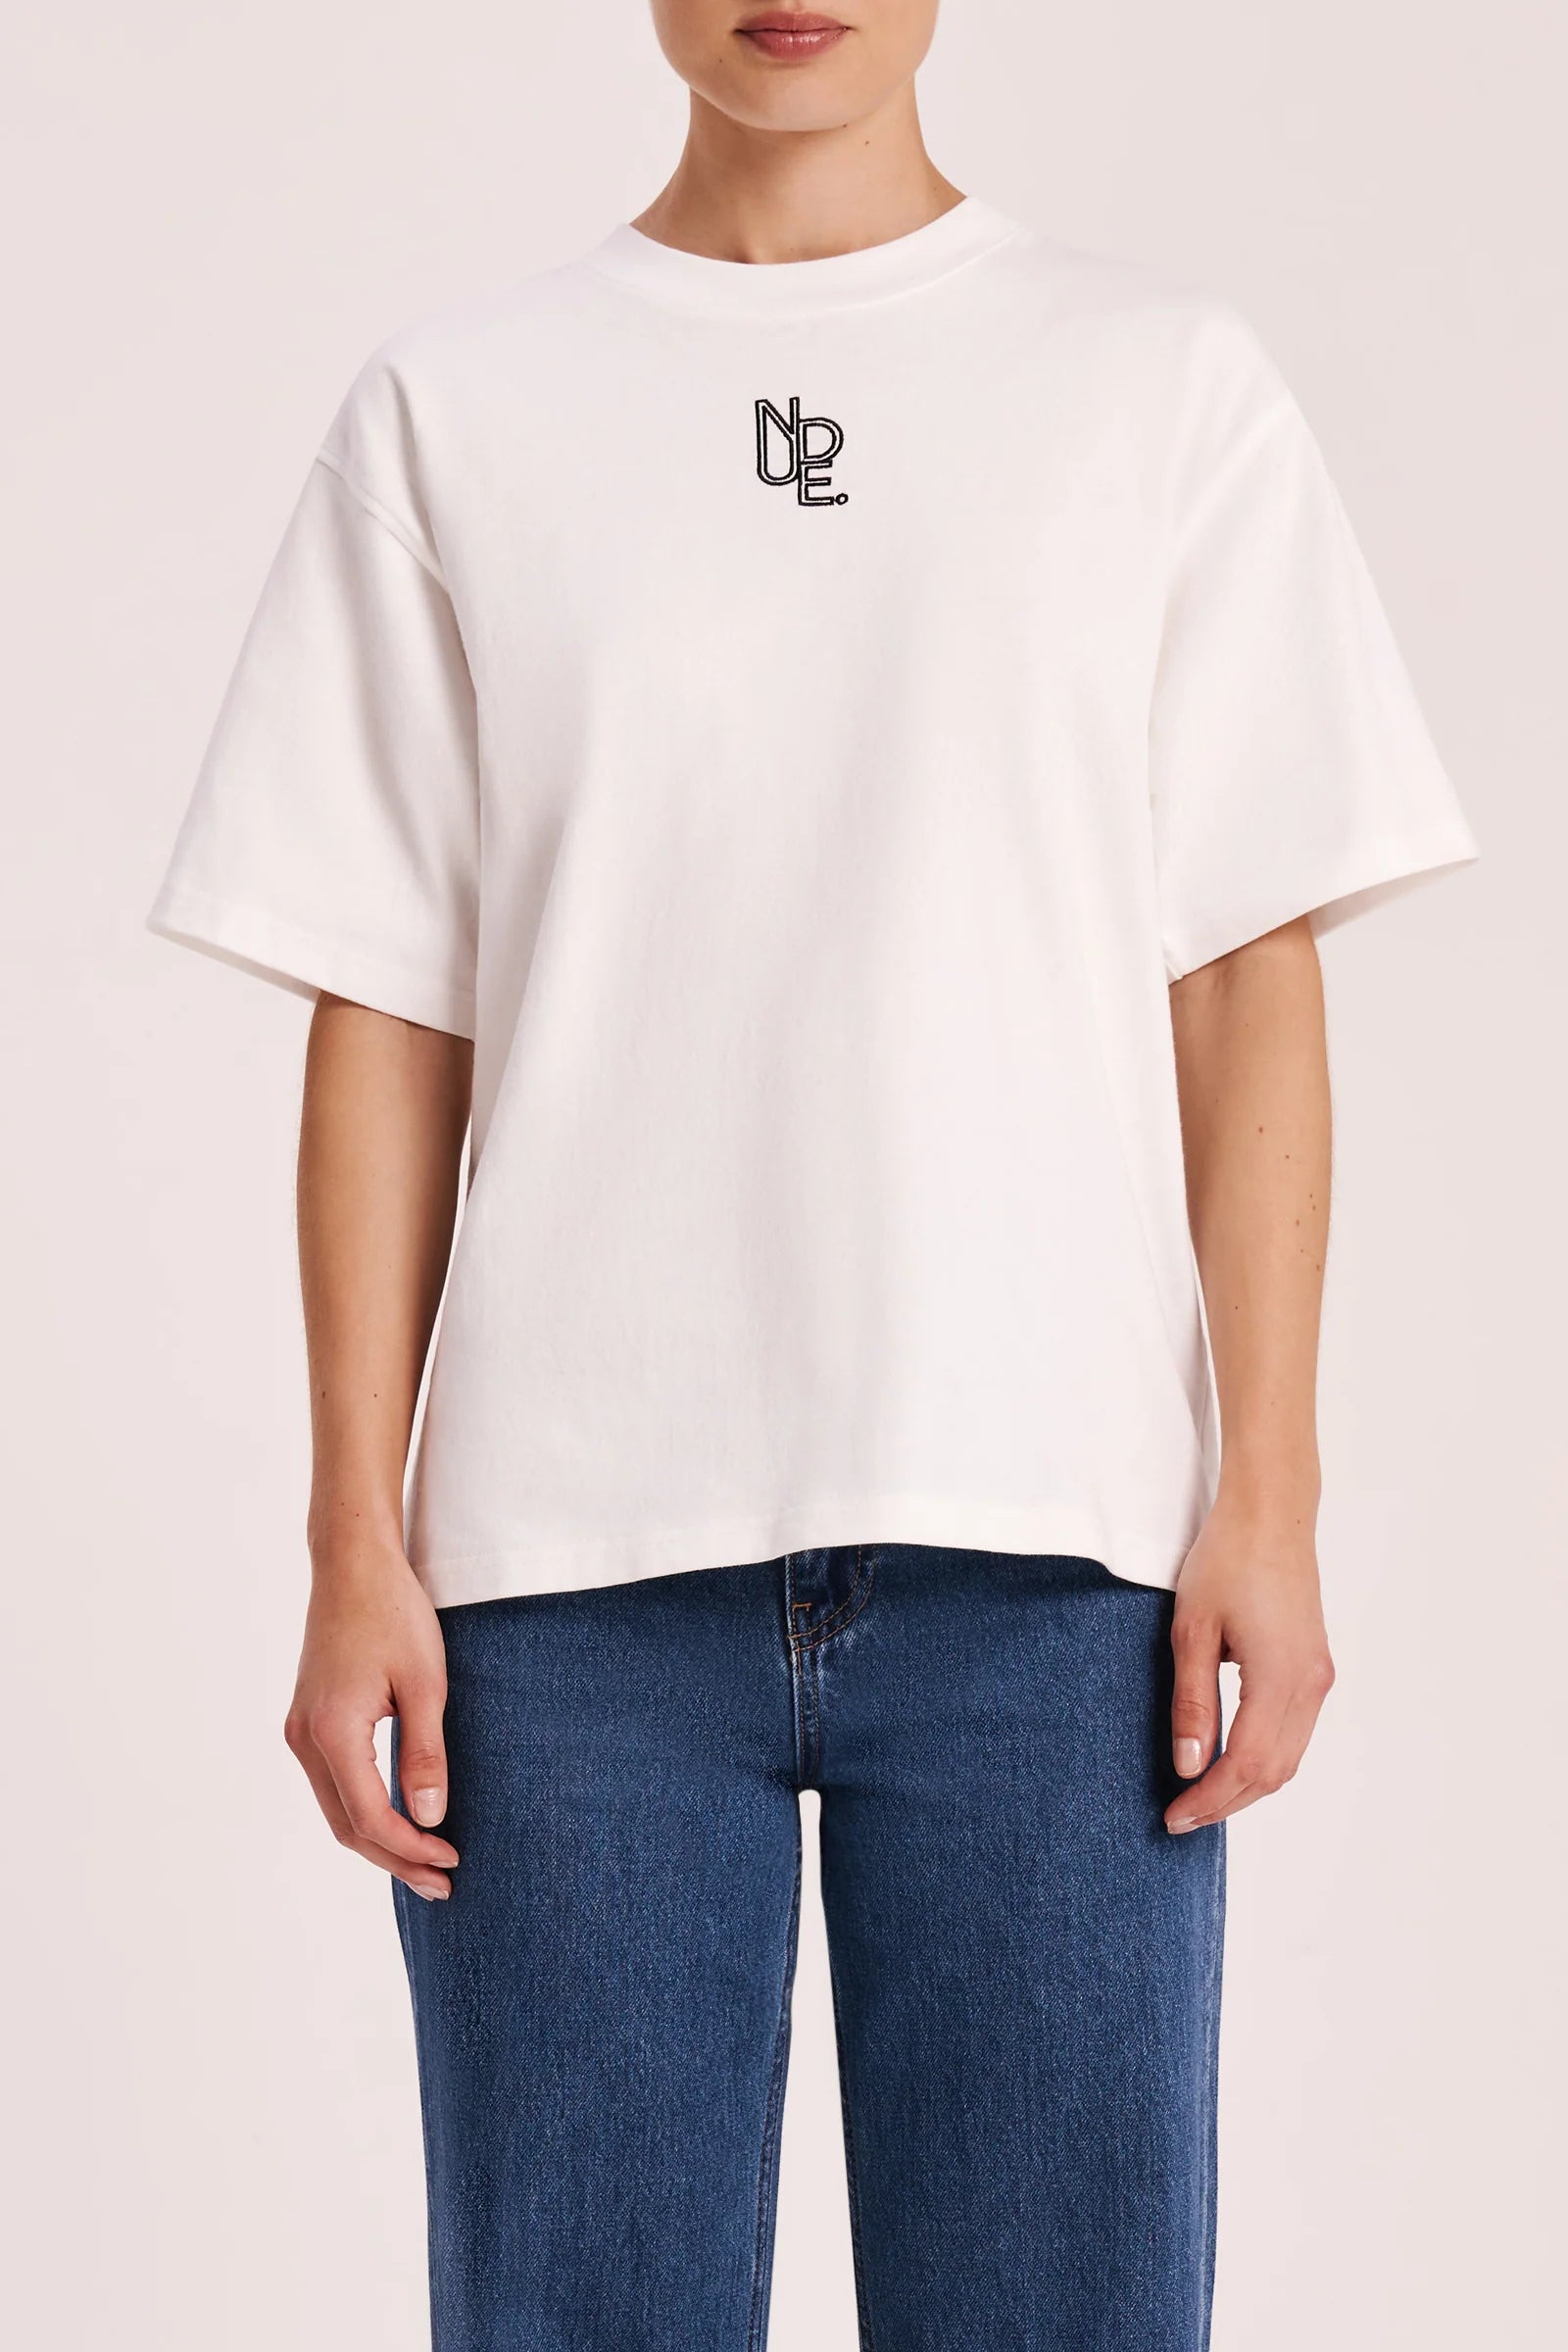 Nude Lucy | Haven Emblem Tee - White